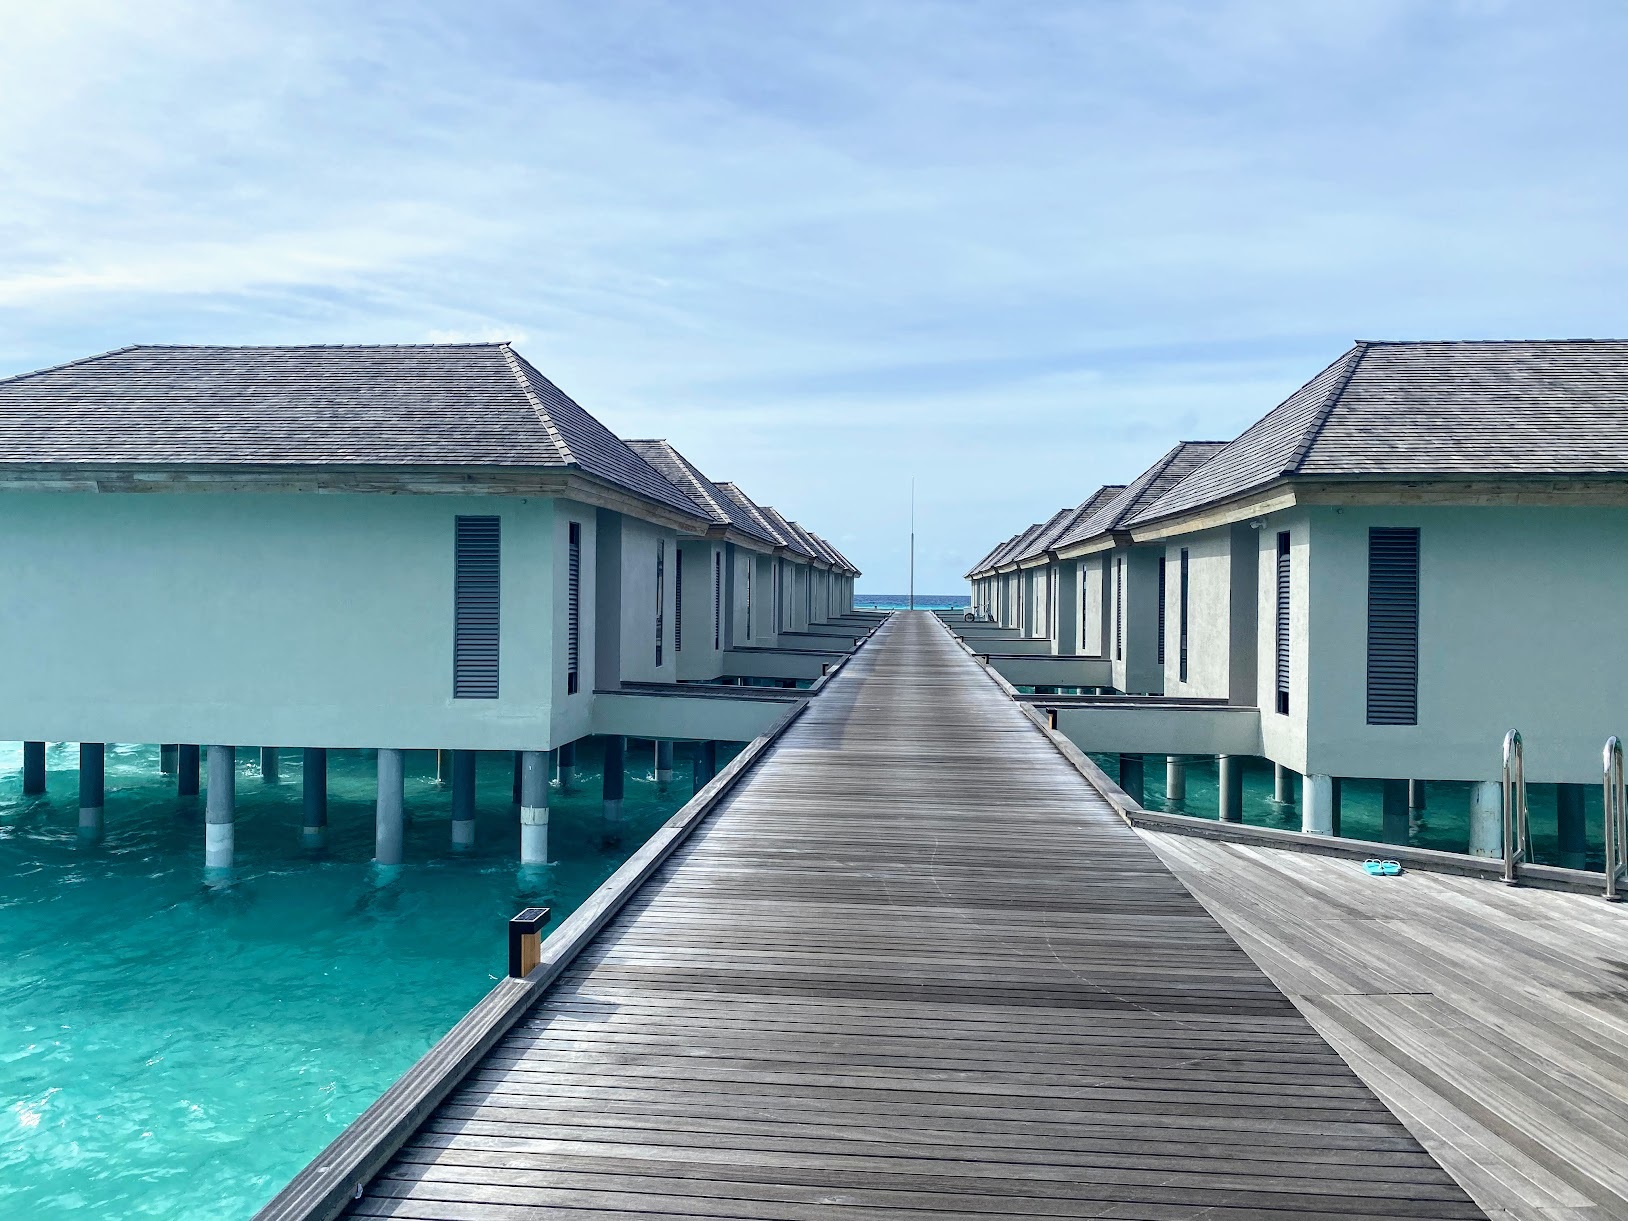 a long walkway leading to a row of houses on stilts